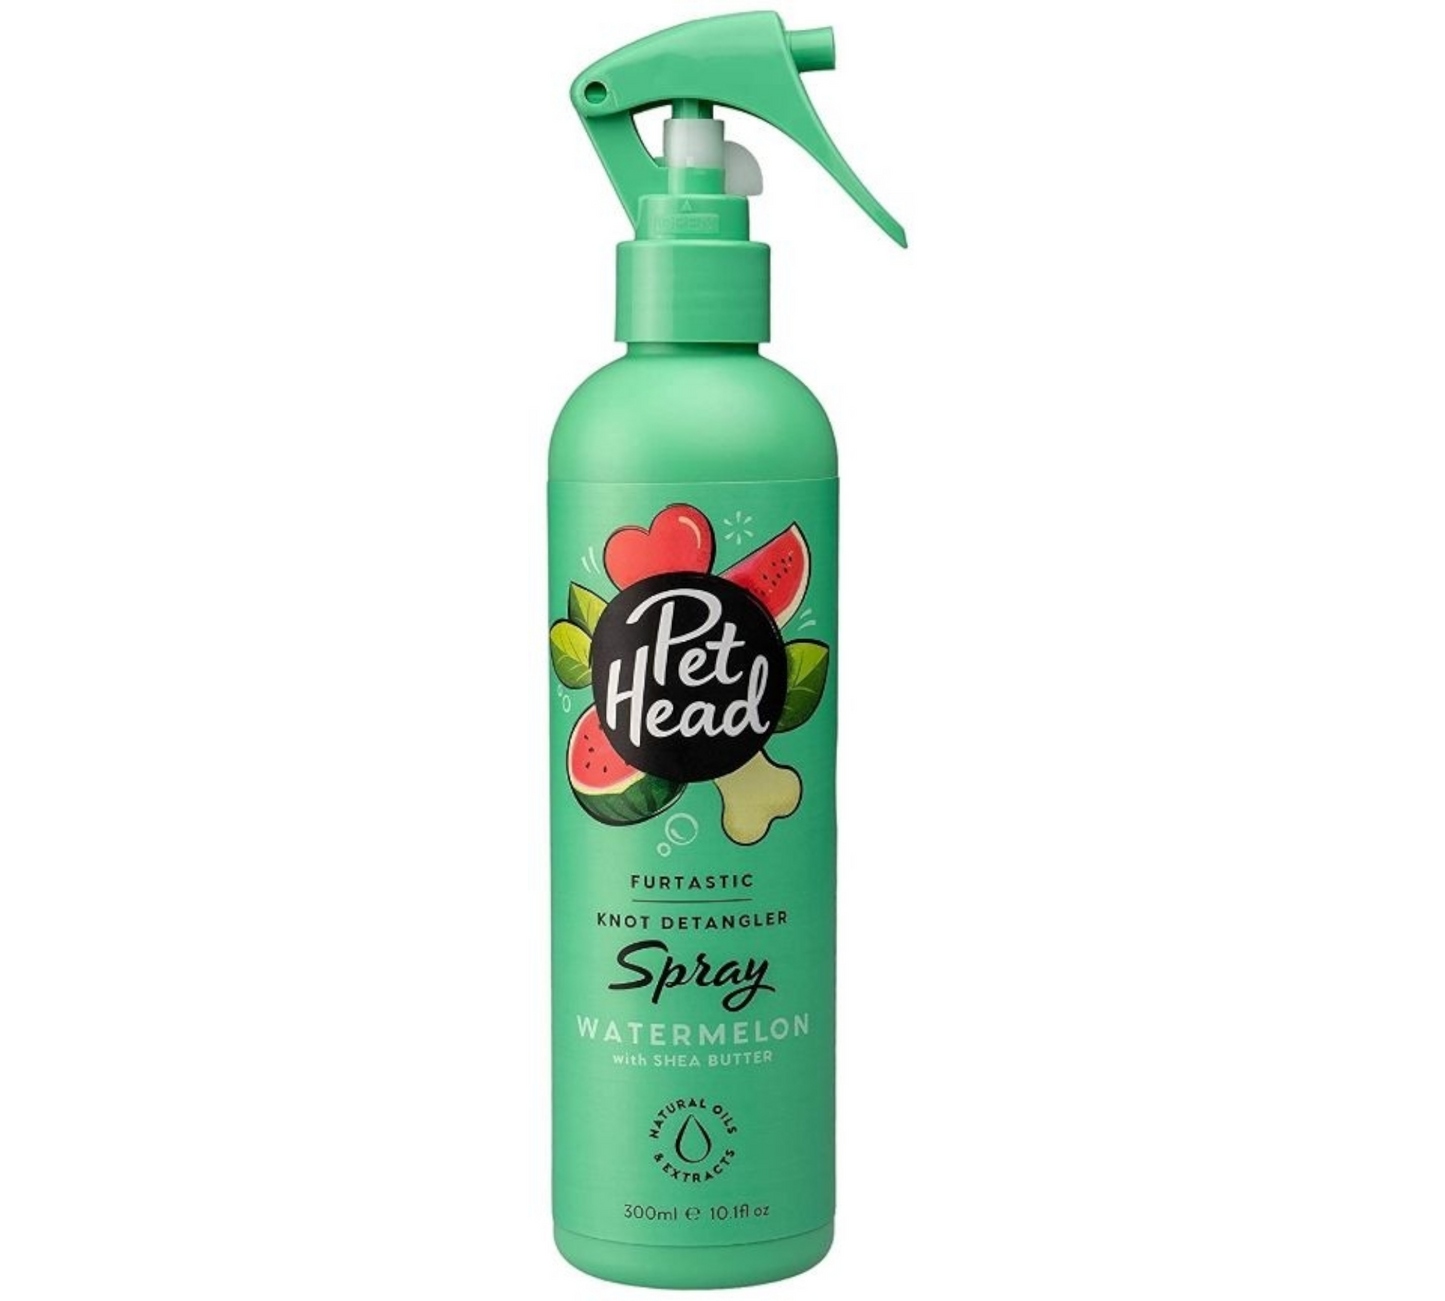 Canine's World Dog Cologne Pet Head Furtastic Knot Detangler Spray for Dogs Watermelon with Shea Butter Pet Head